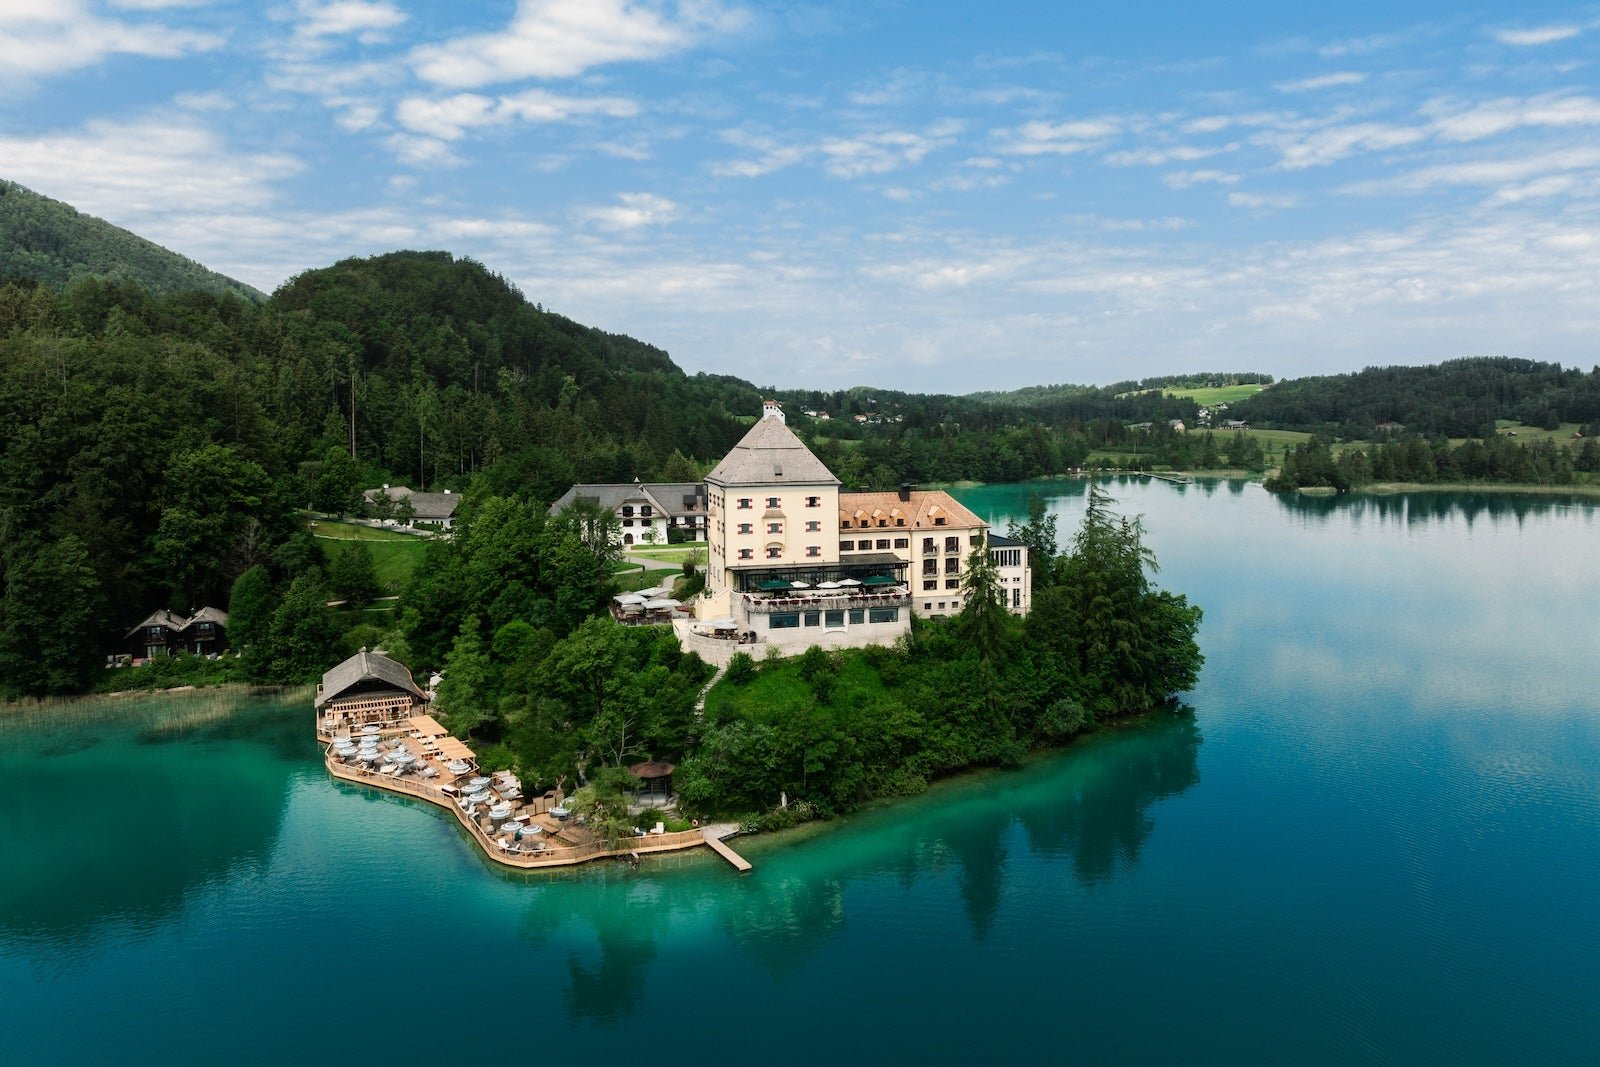 Rosewood just opened a hotel in a 15th-century castle in Austria